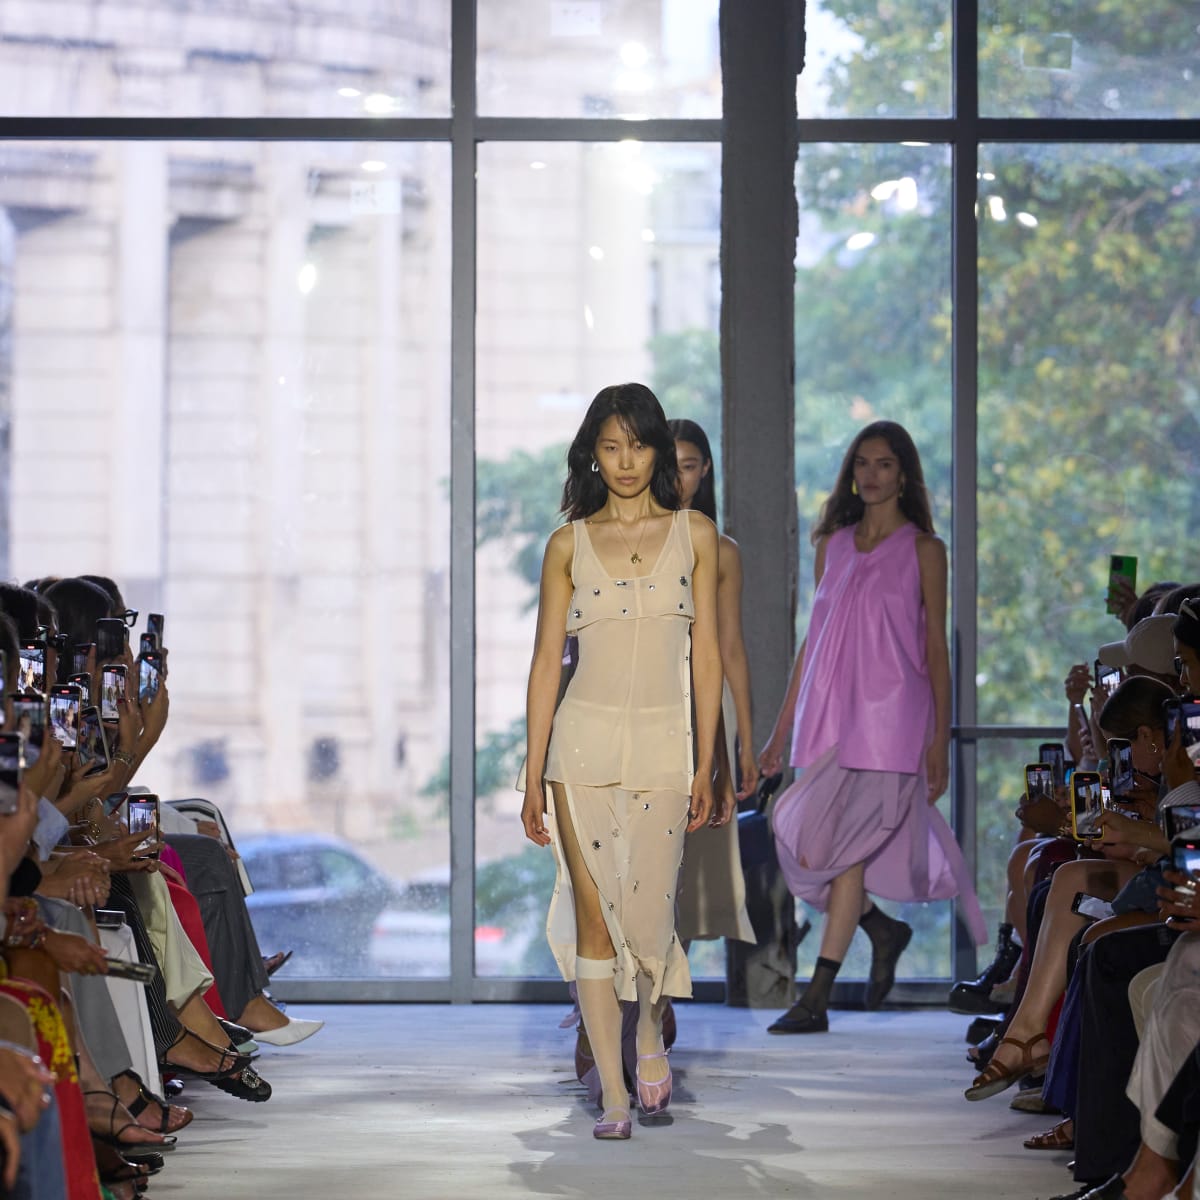 3.1 Phillip Lim Returns to the Runway With an Ode to New York